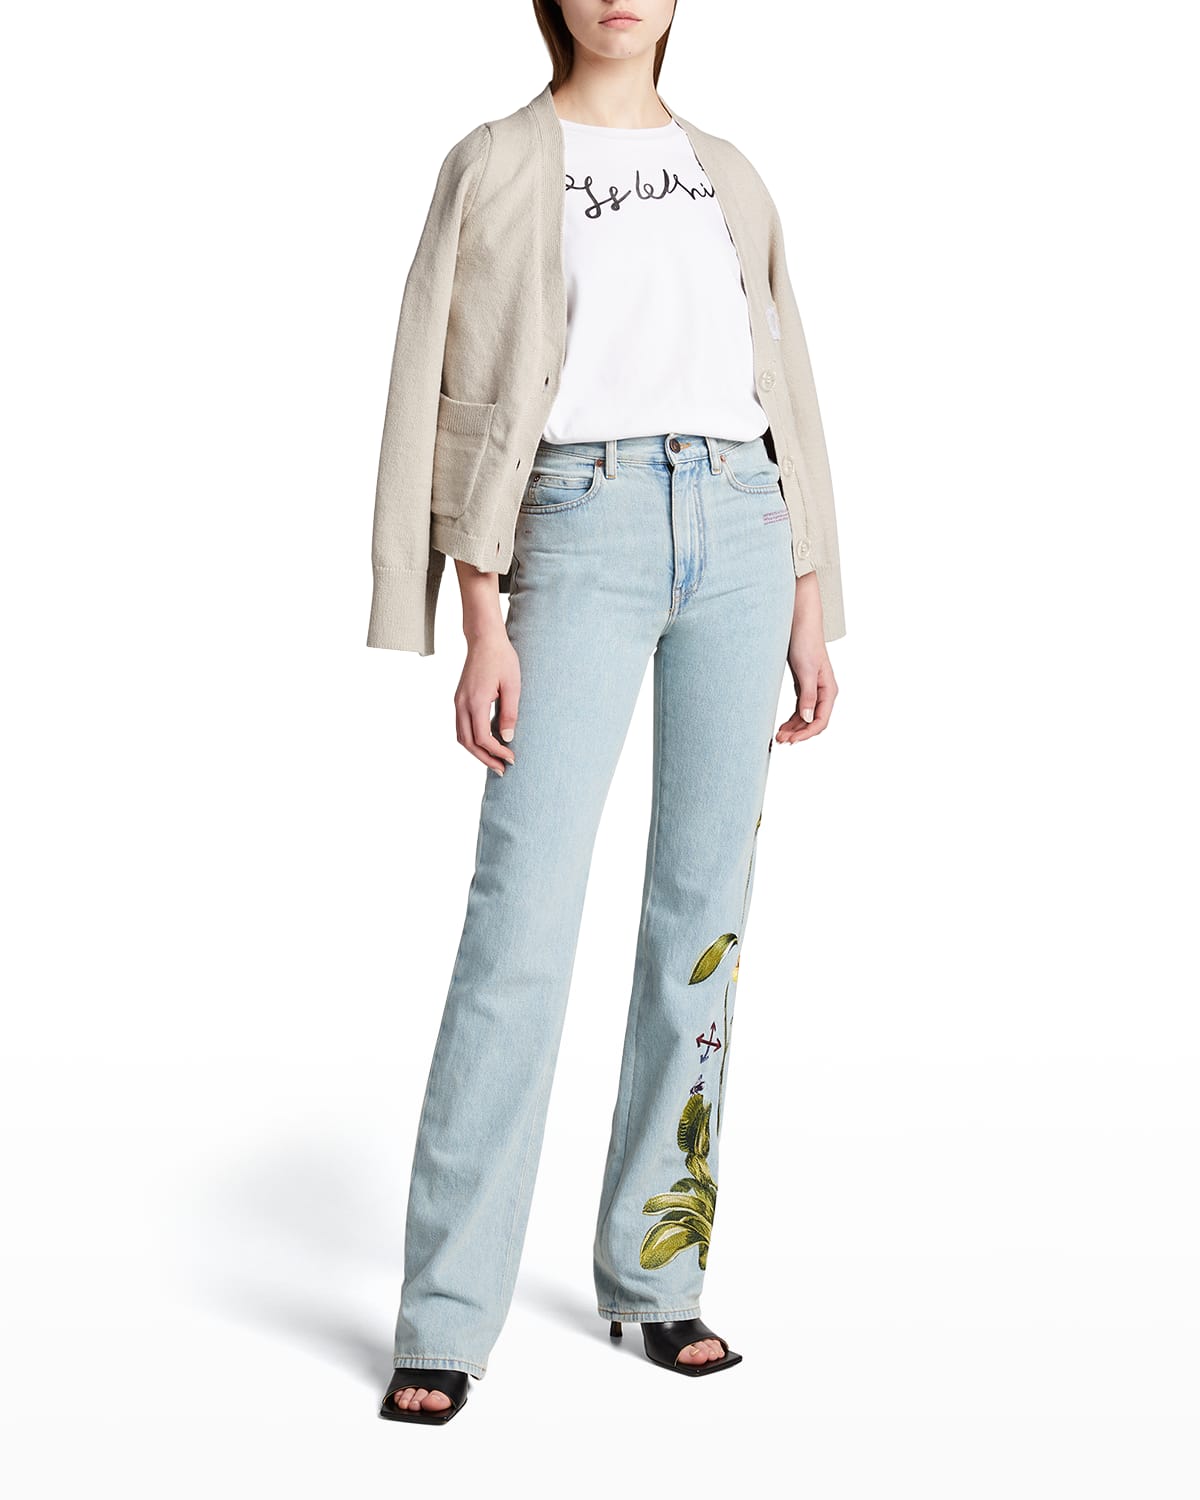 Off-White Floral-Embroidered Baggy Jeans